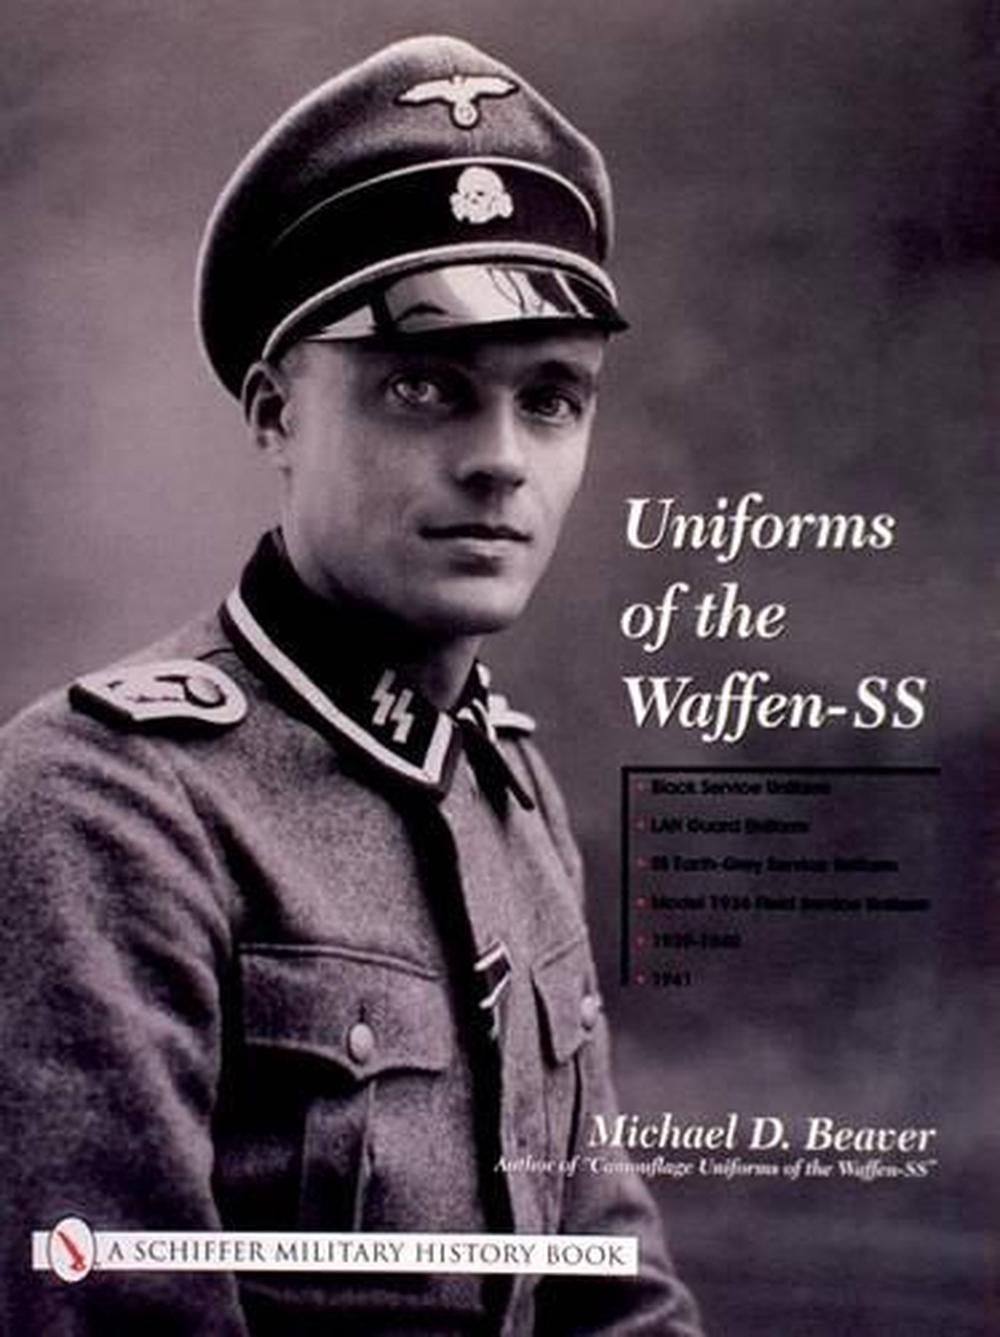 Uniforms of the Waffen-SS by Michael D. Beaver, Hardcover ...